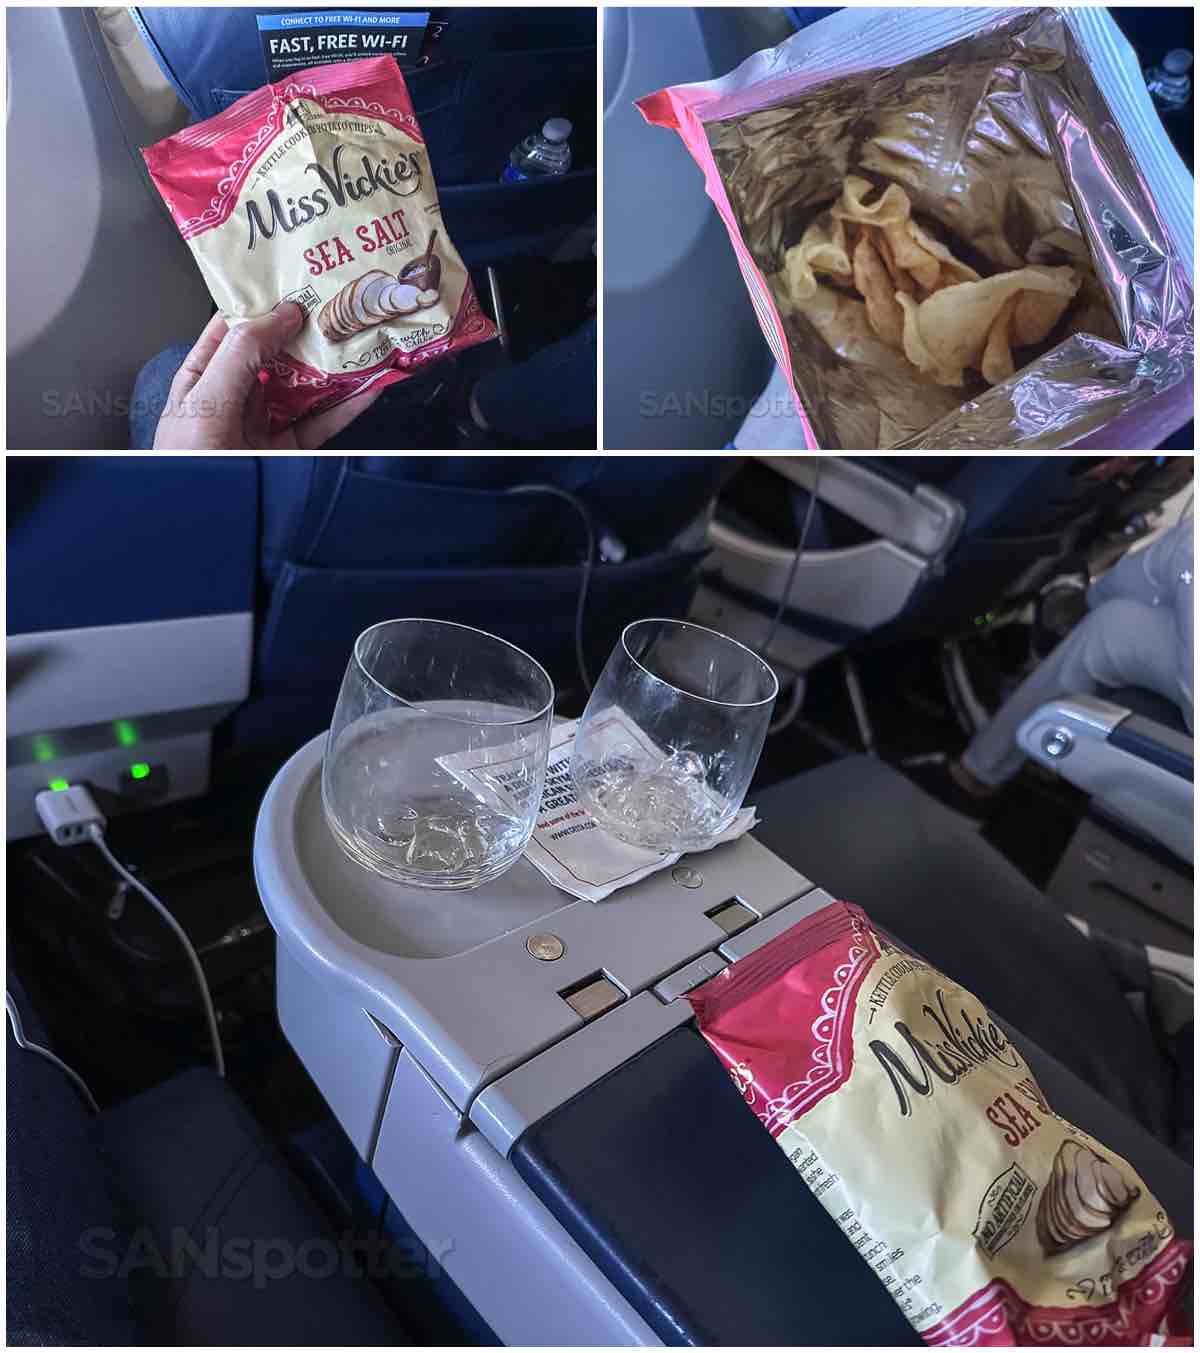 Delta 737-900 first class seat pre-landing potato chips snack anyone